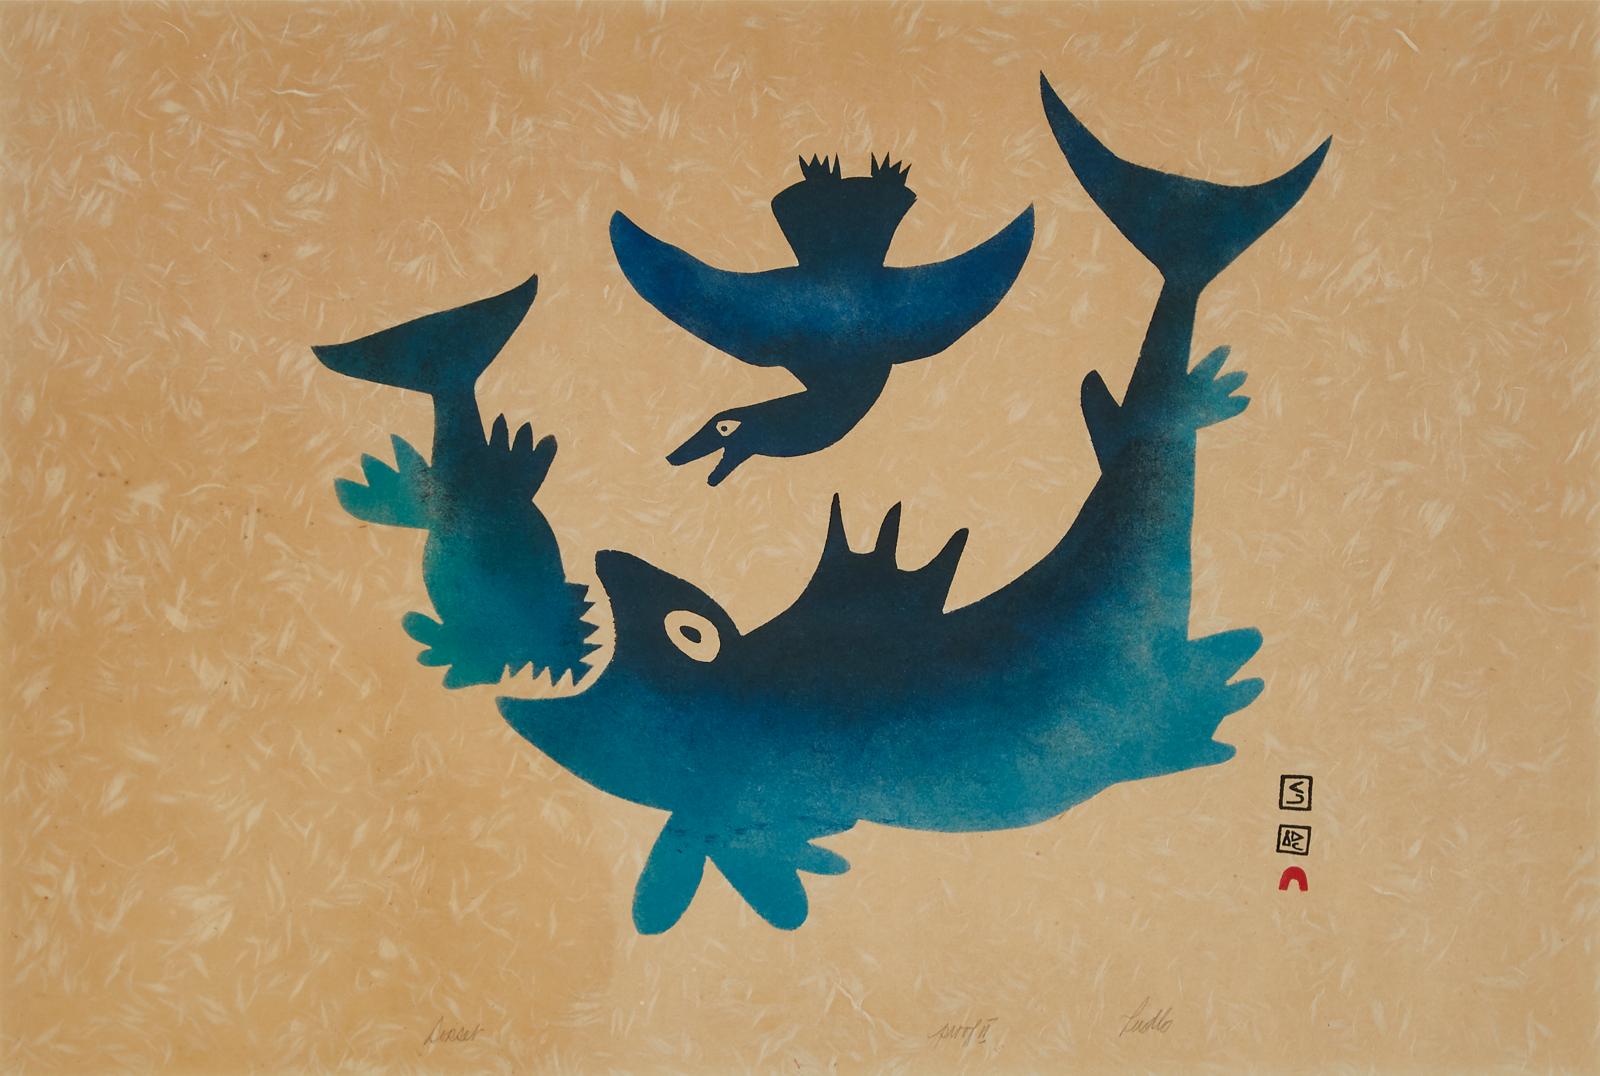 Pudlo Pudlat (1916-1992) - Fish And Gull/ Untitled (Sea Creatures And Bird)